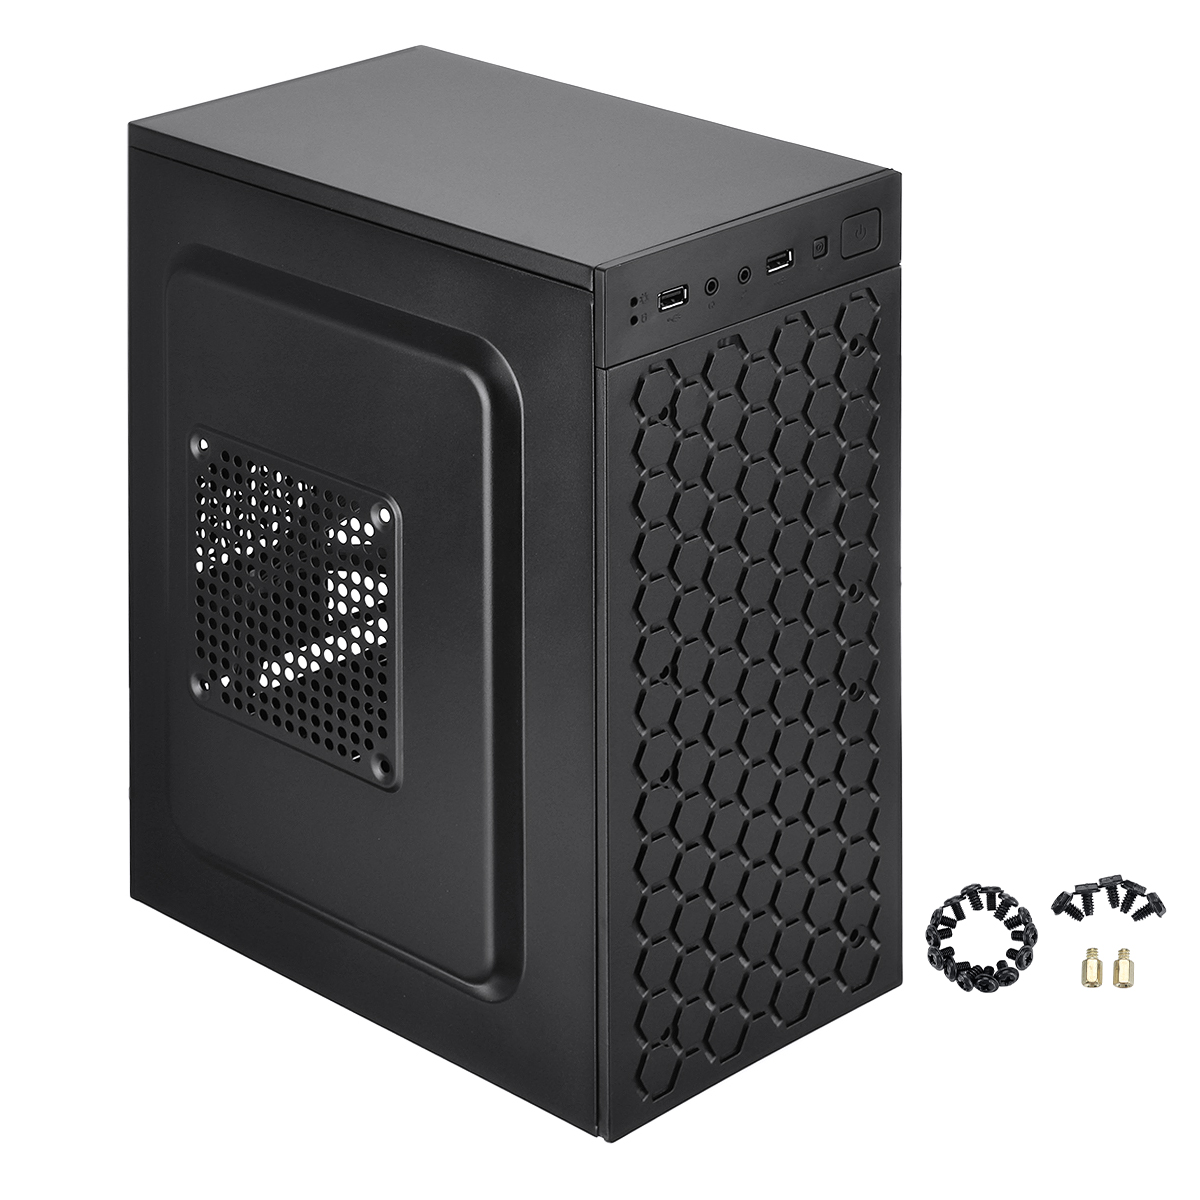 Find Micro ATX ITX Black USB 2 0 Office Gaming Computer Destop Case PC Cases LED Fan for Sale on Gipsybee.com with cryptocurrencies